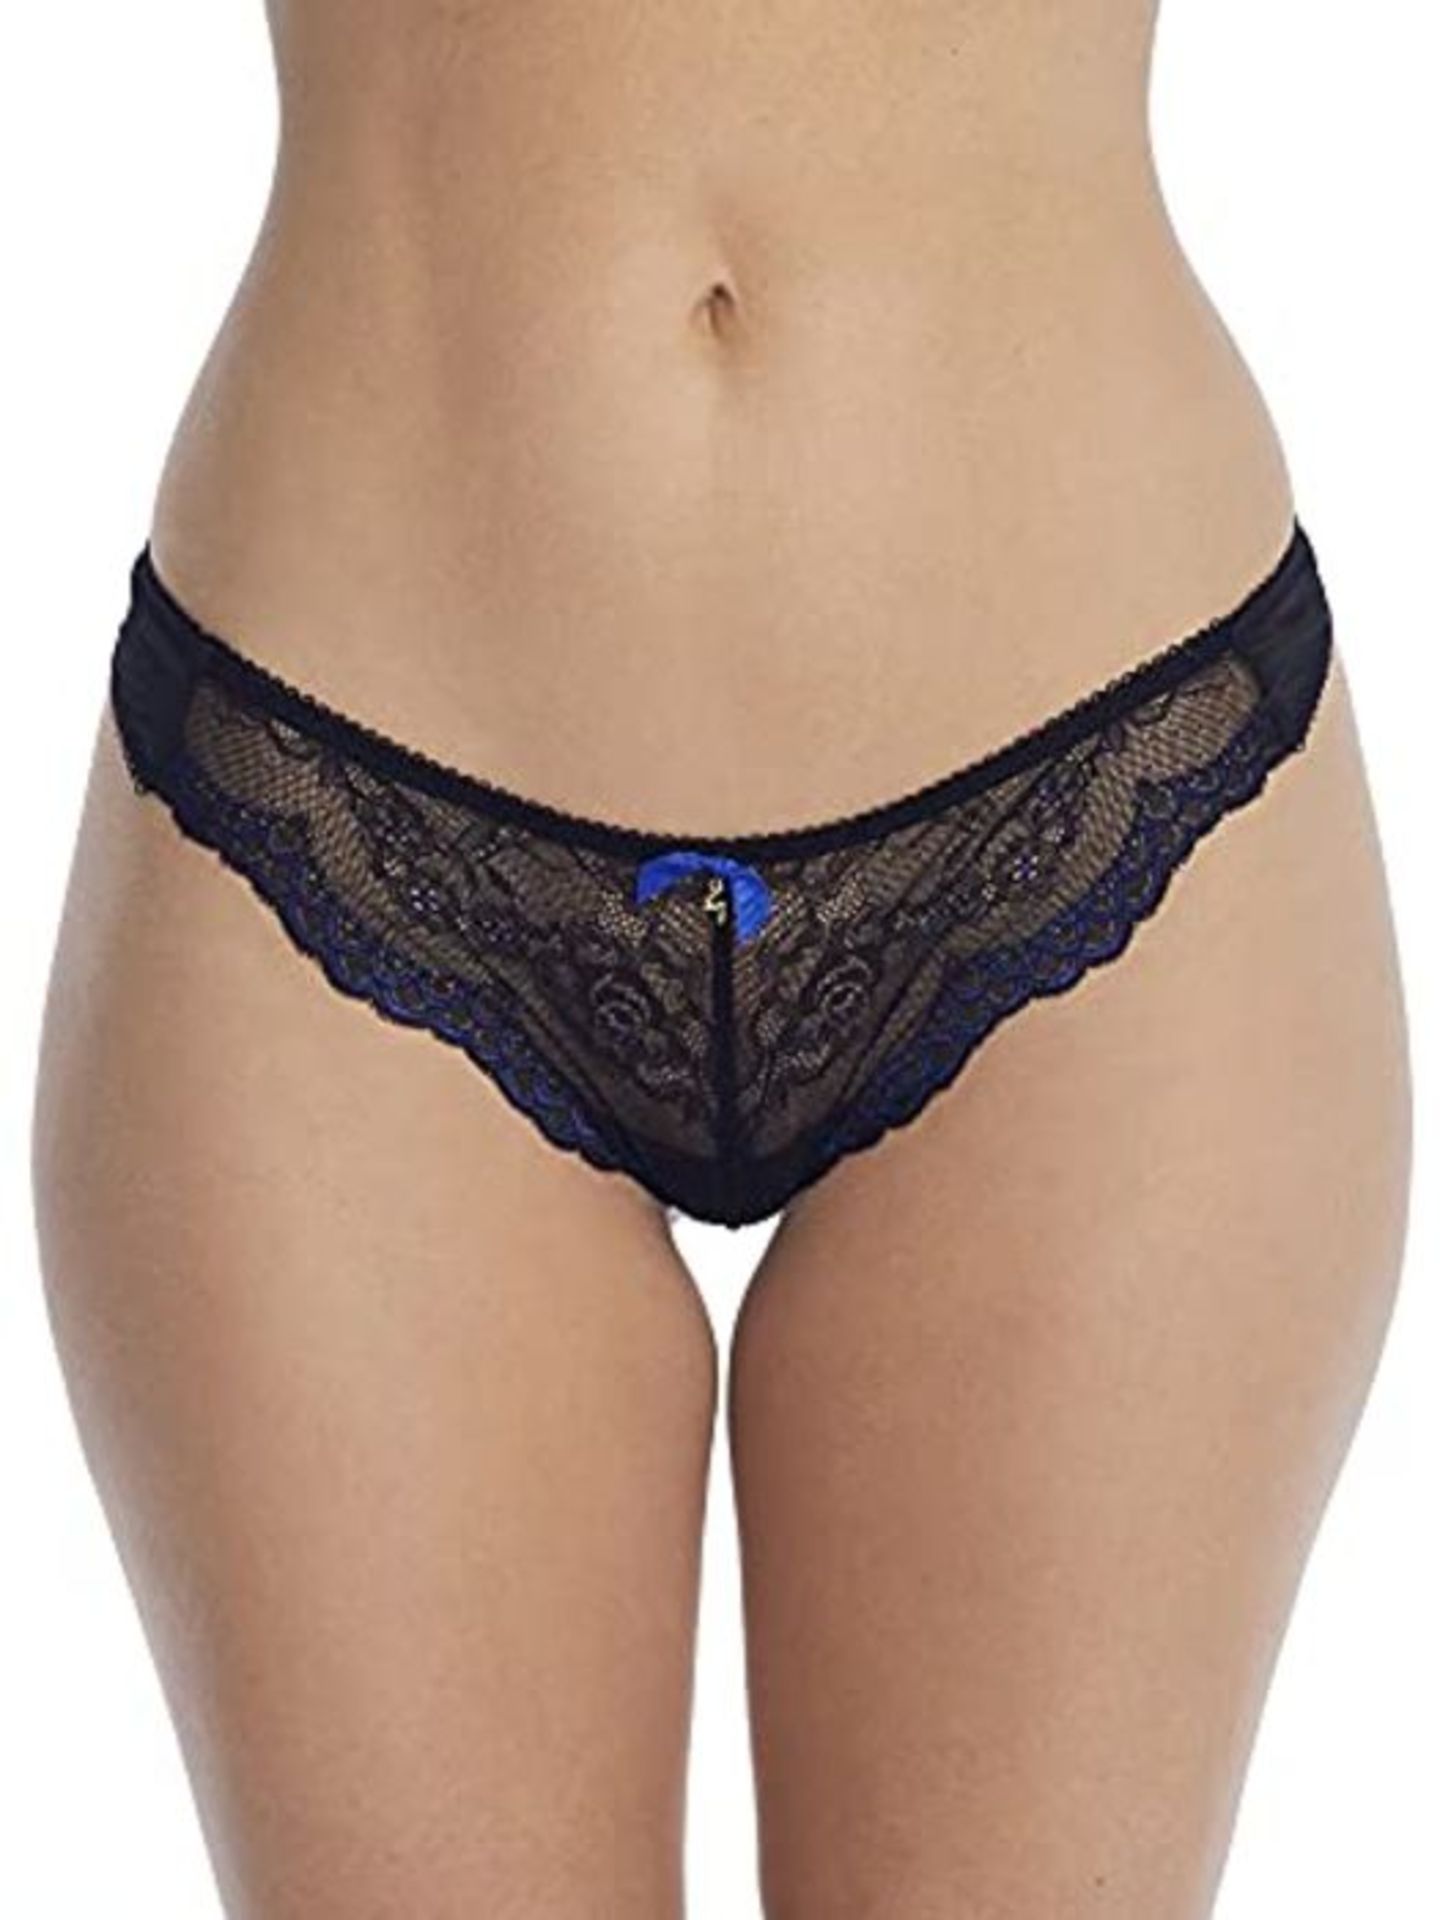 Gossard Women's Superboost Lace Thong Panties, Black/Electric Blue, Extra Small - Image 3 of 4